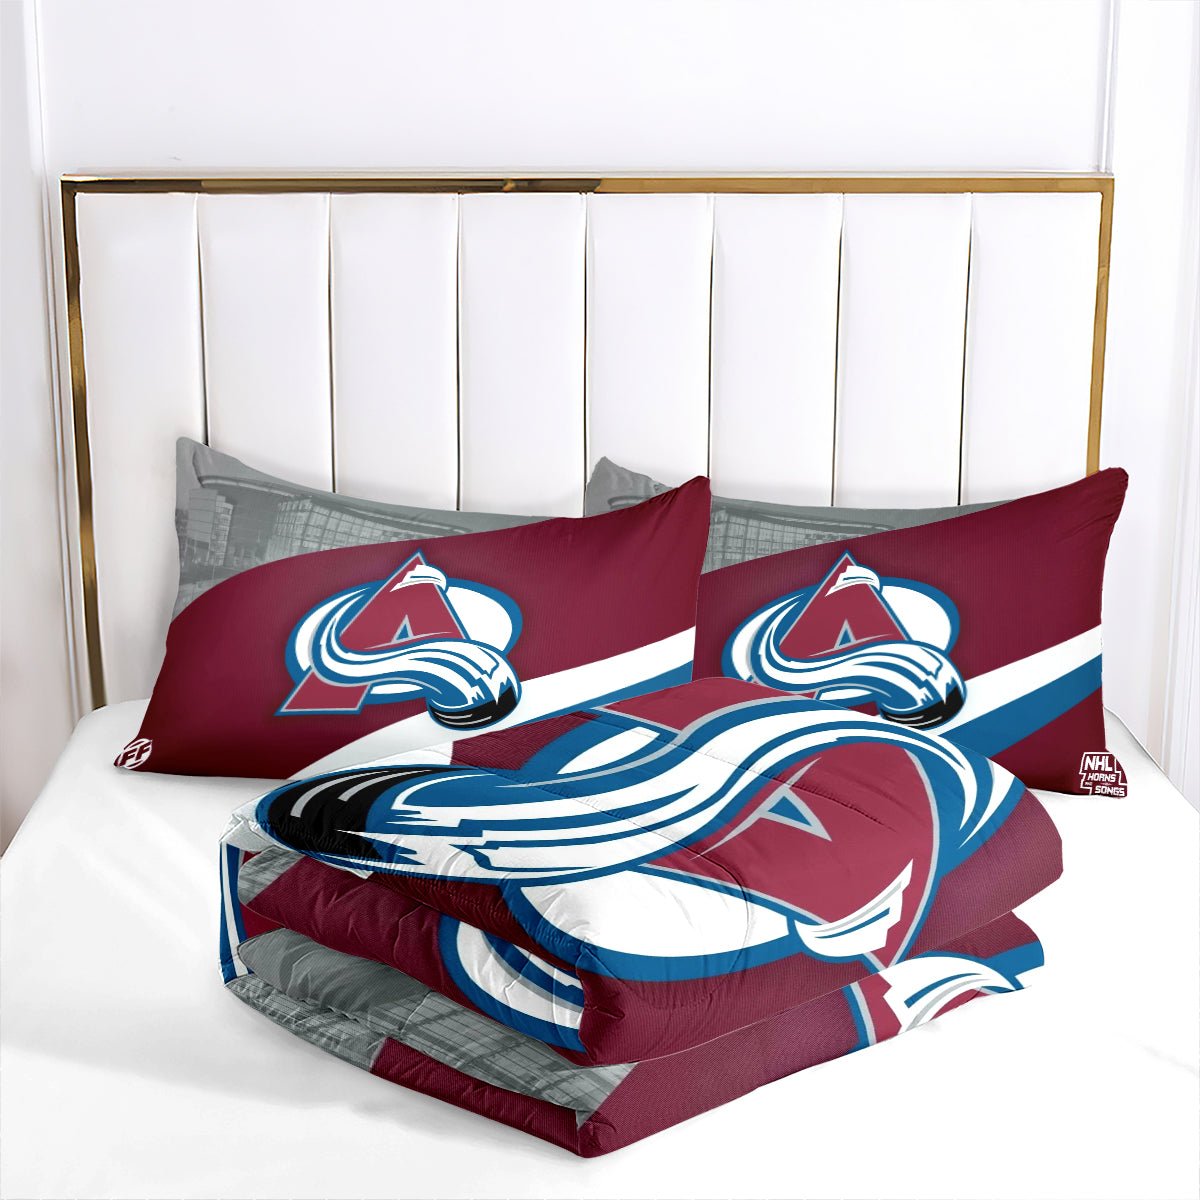 Colorado Avalanche Hockey Comforter Pillowcases 3PC Sets Blanket All Season Reversible Quilted Duvet